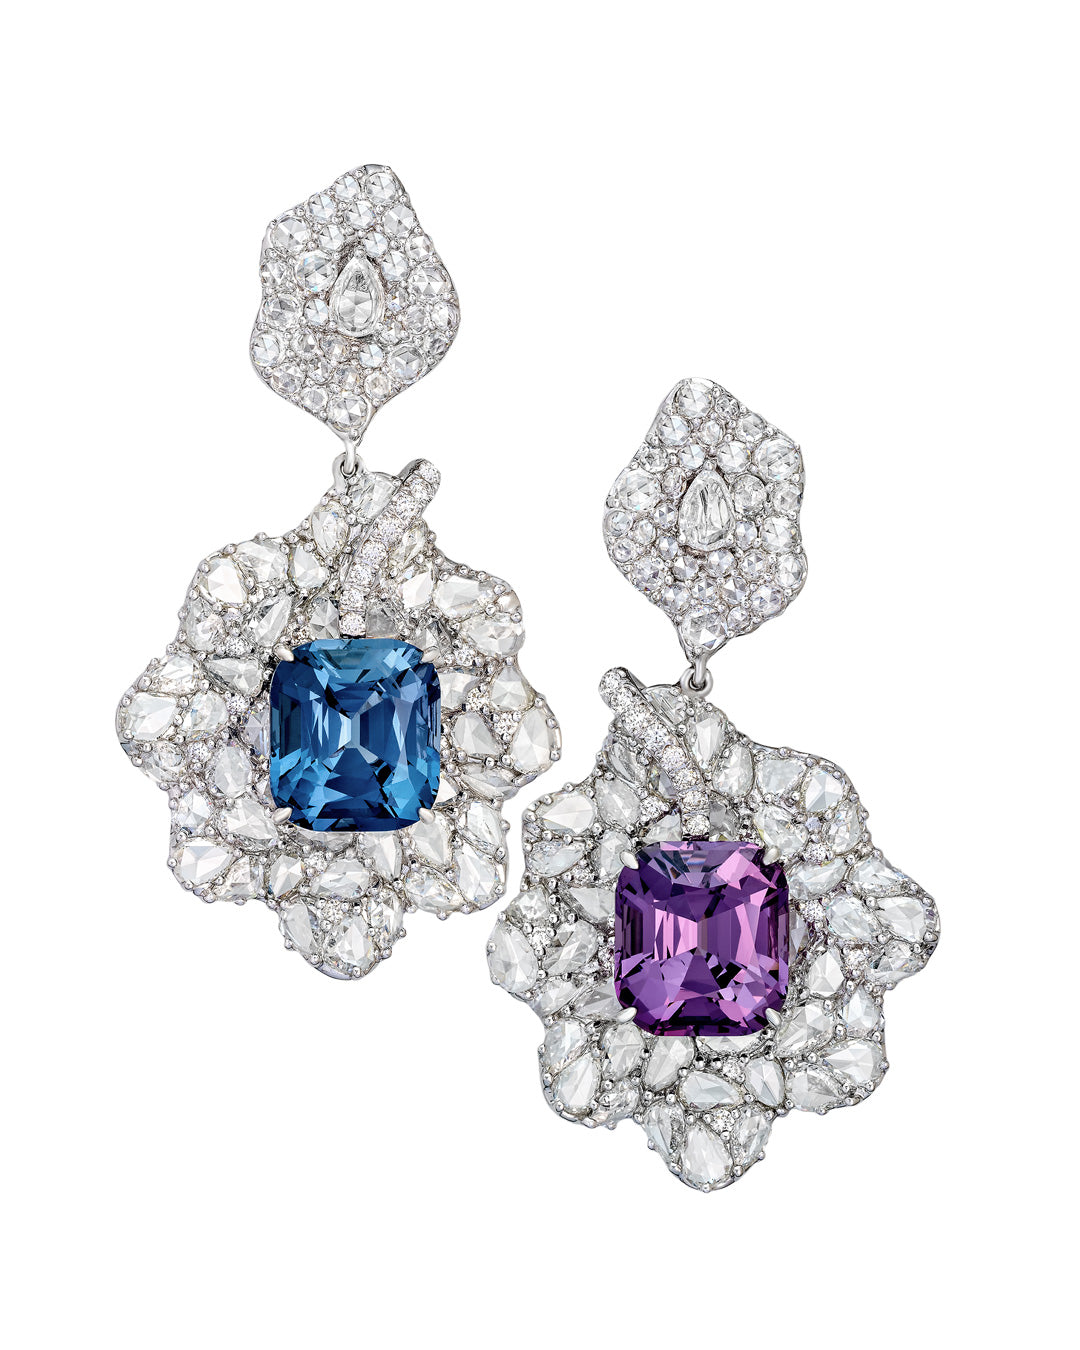 Diamond Chandelier Mix Match Earrings with violet and blue spinels enhanced with diamonds, crafted in 18 karat white gold